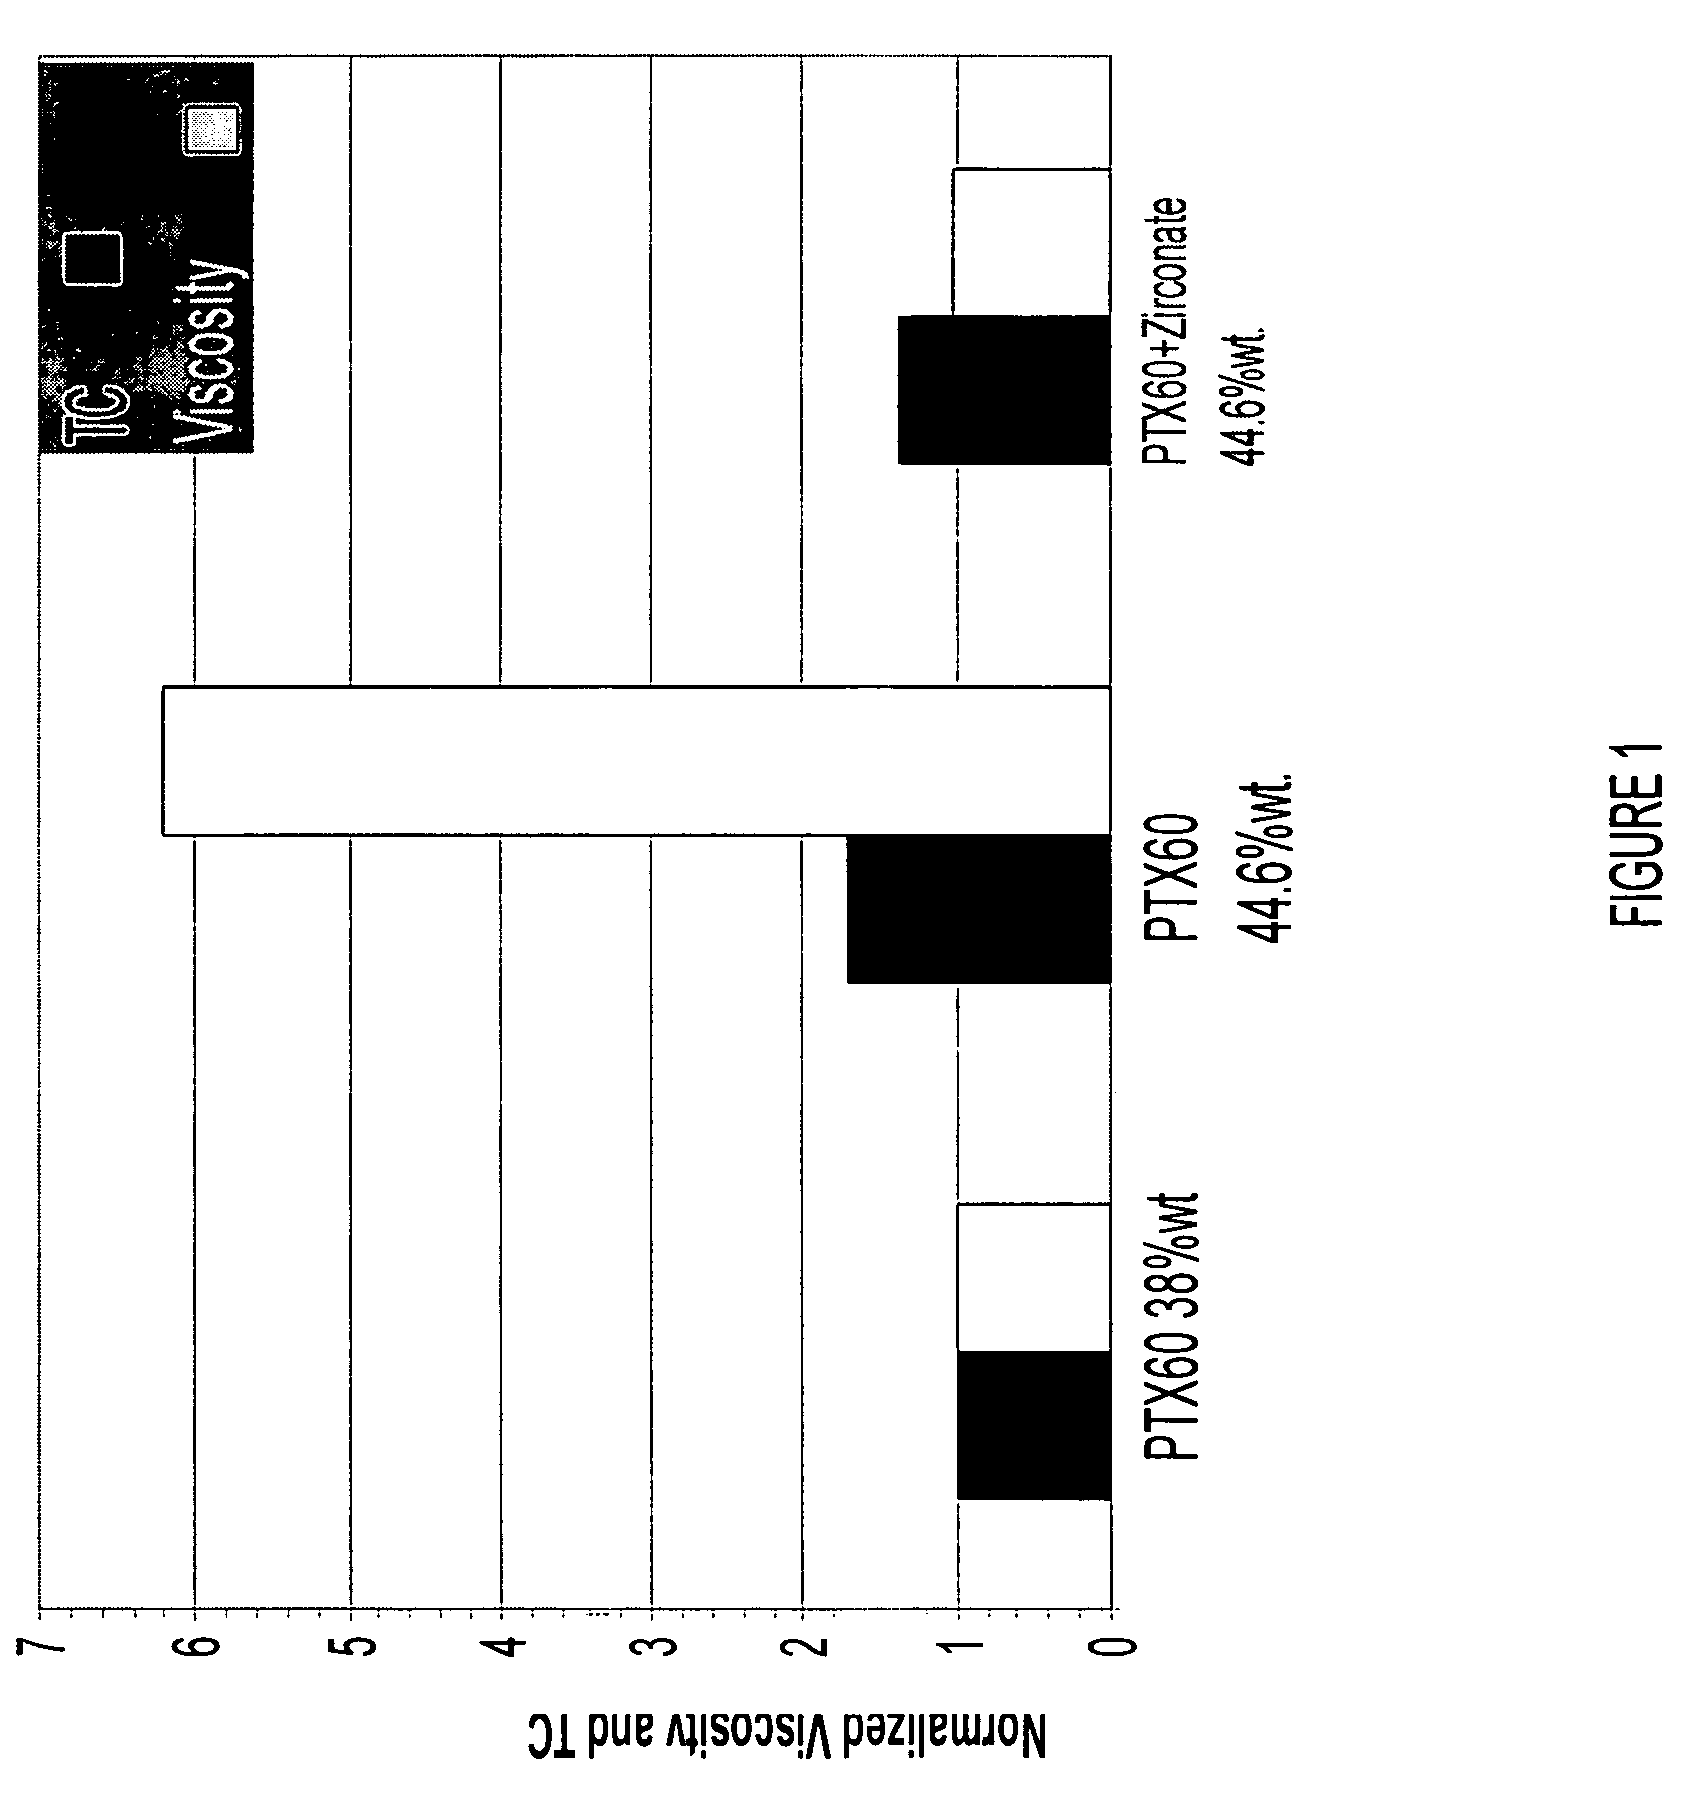 Enhanced boron nitride composition and polymer-based compositions made therewith